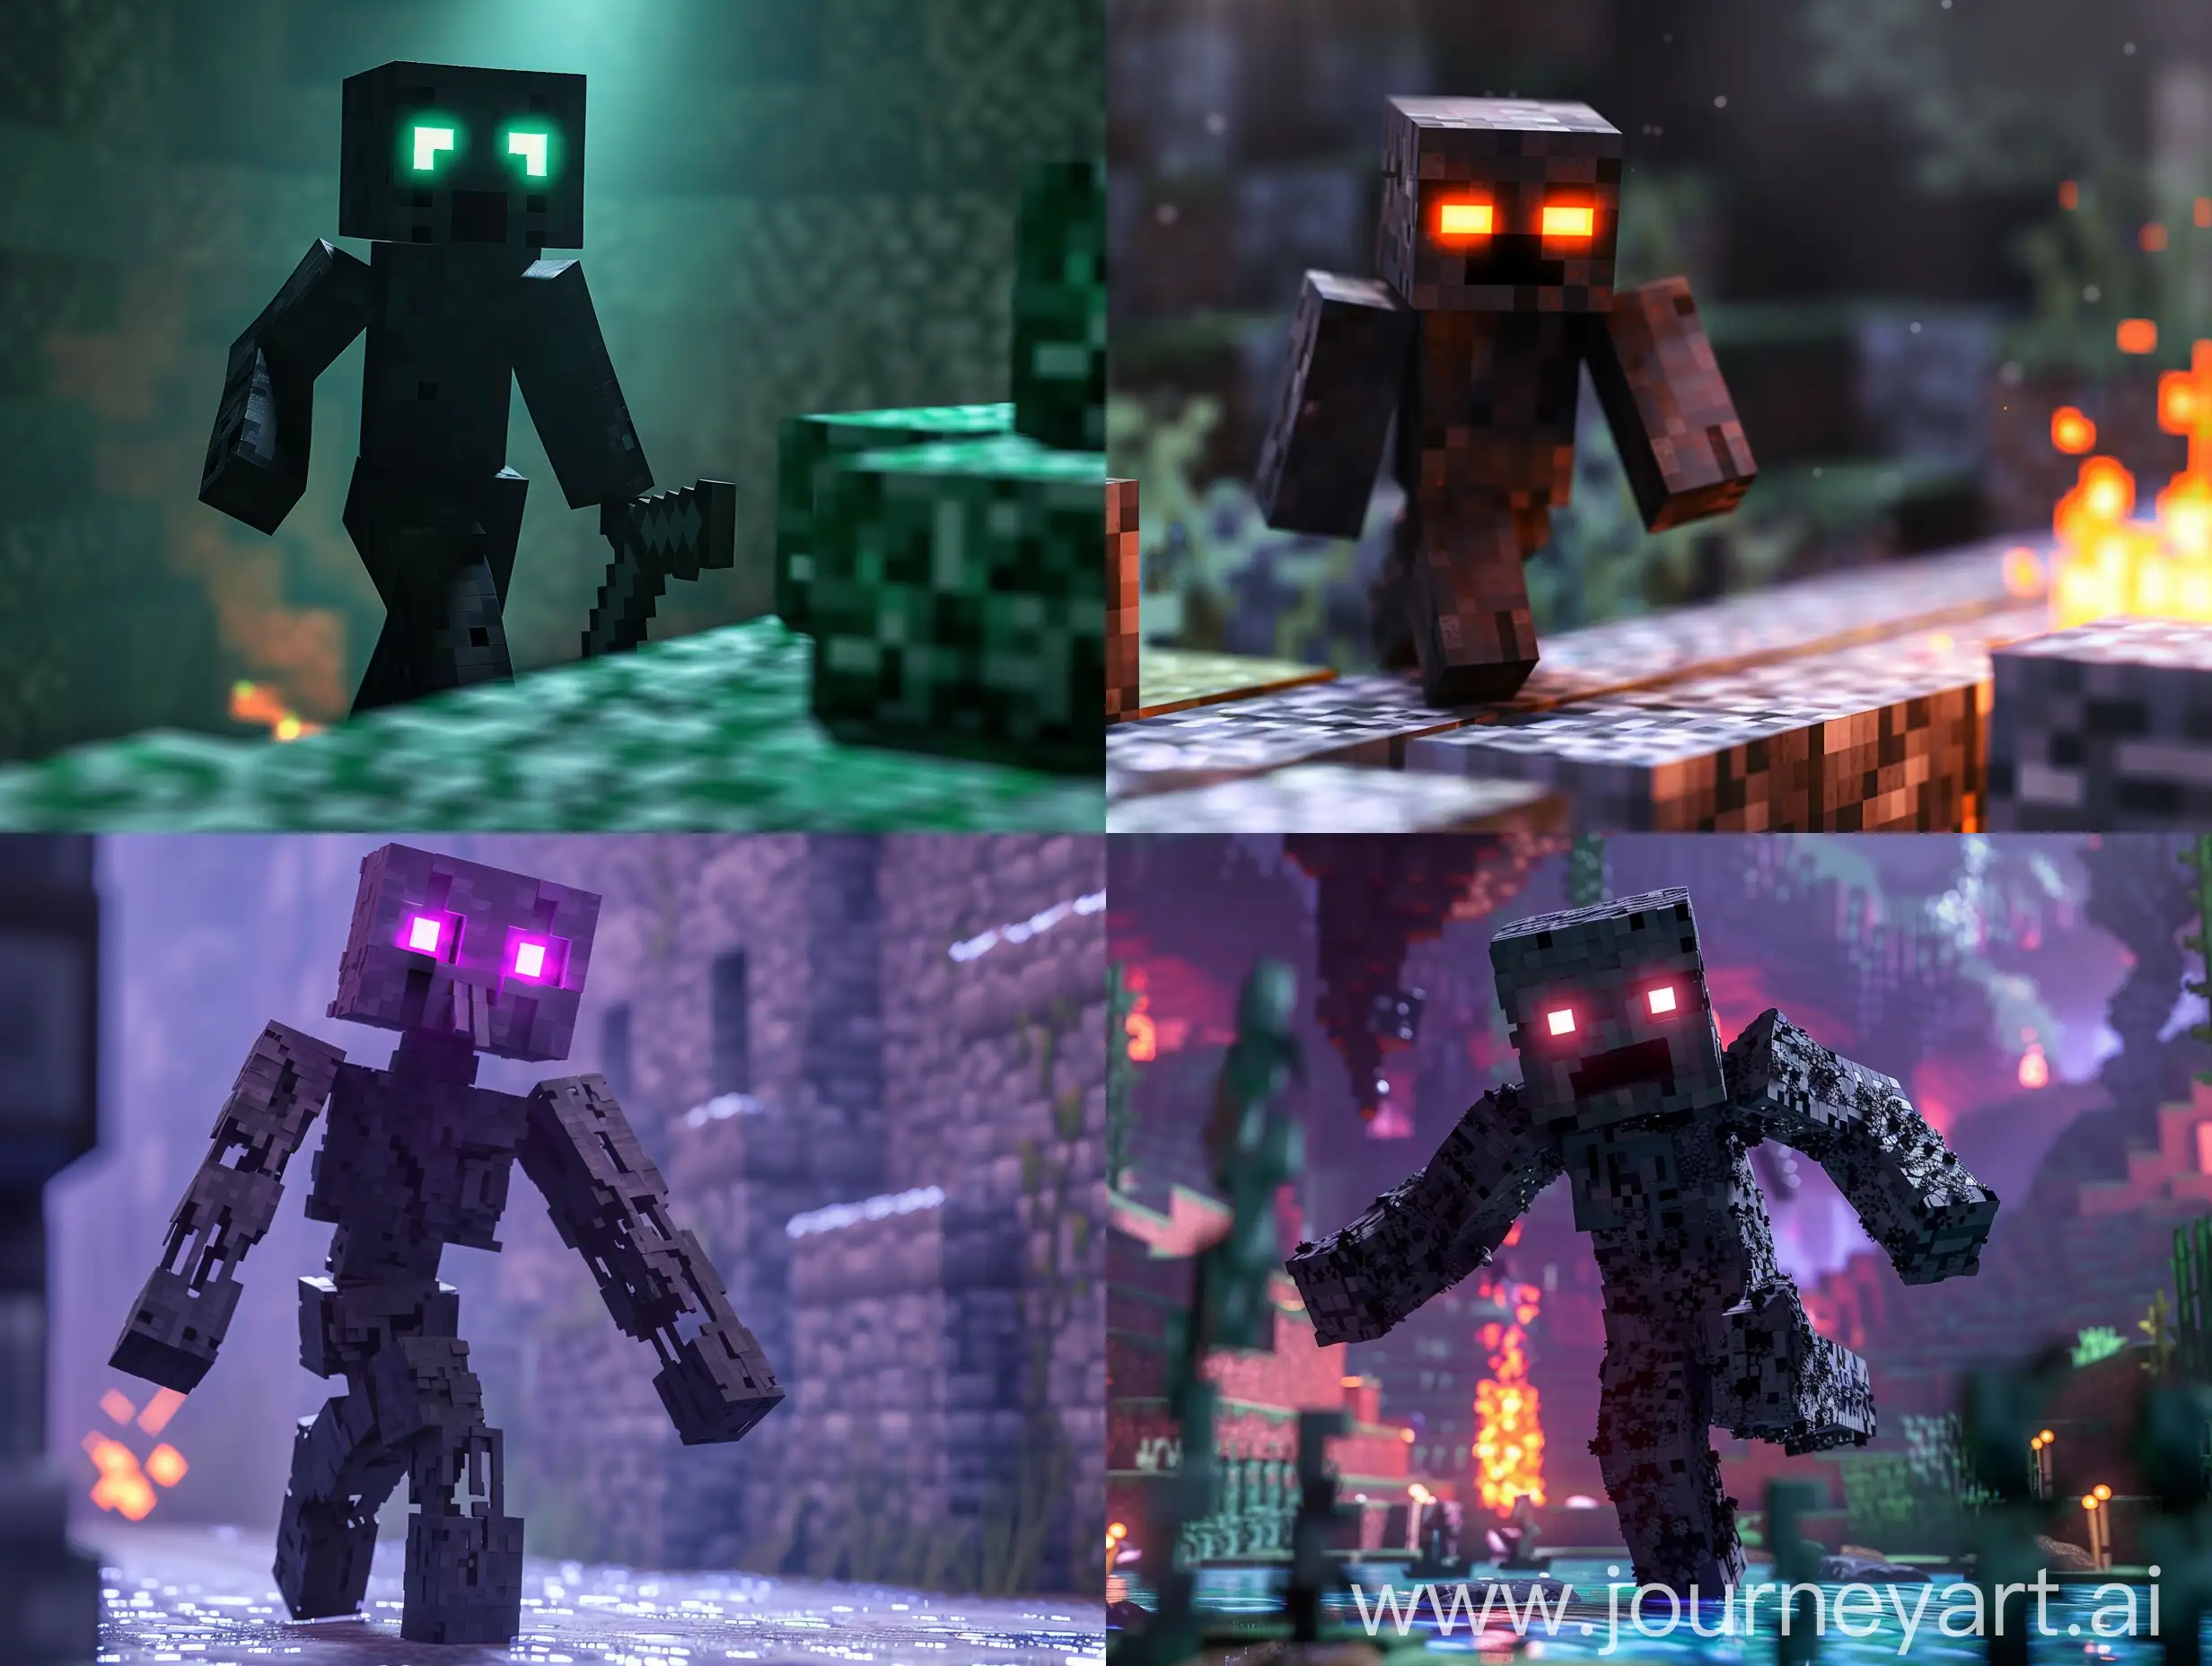 Enderman-Encounter-in-Minecraft-A-SpineChilling-Scene